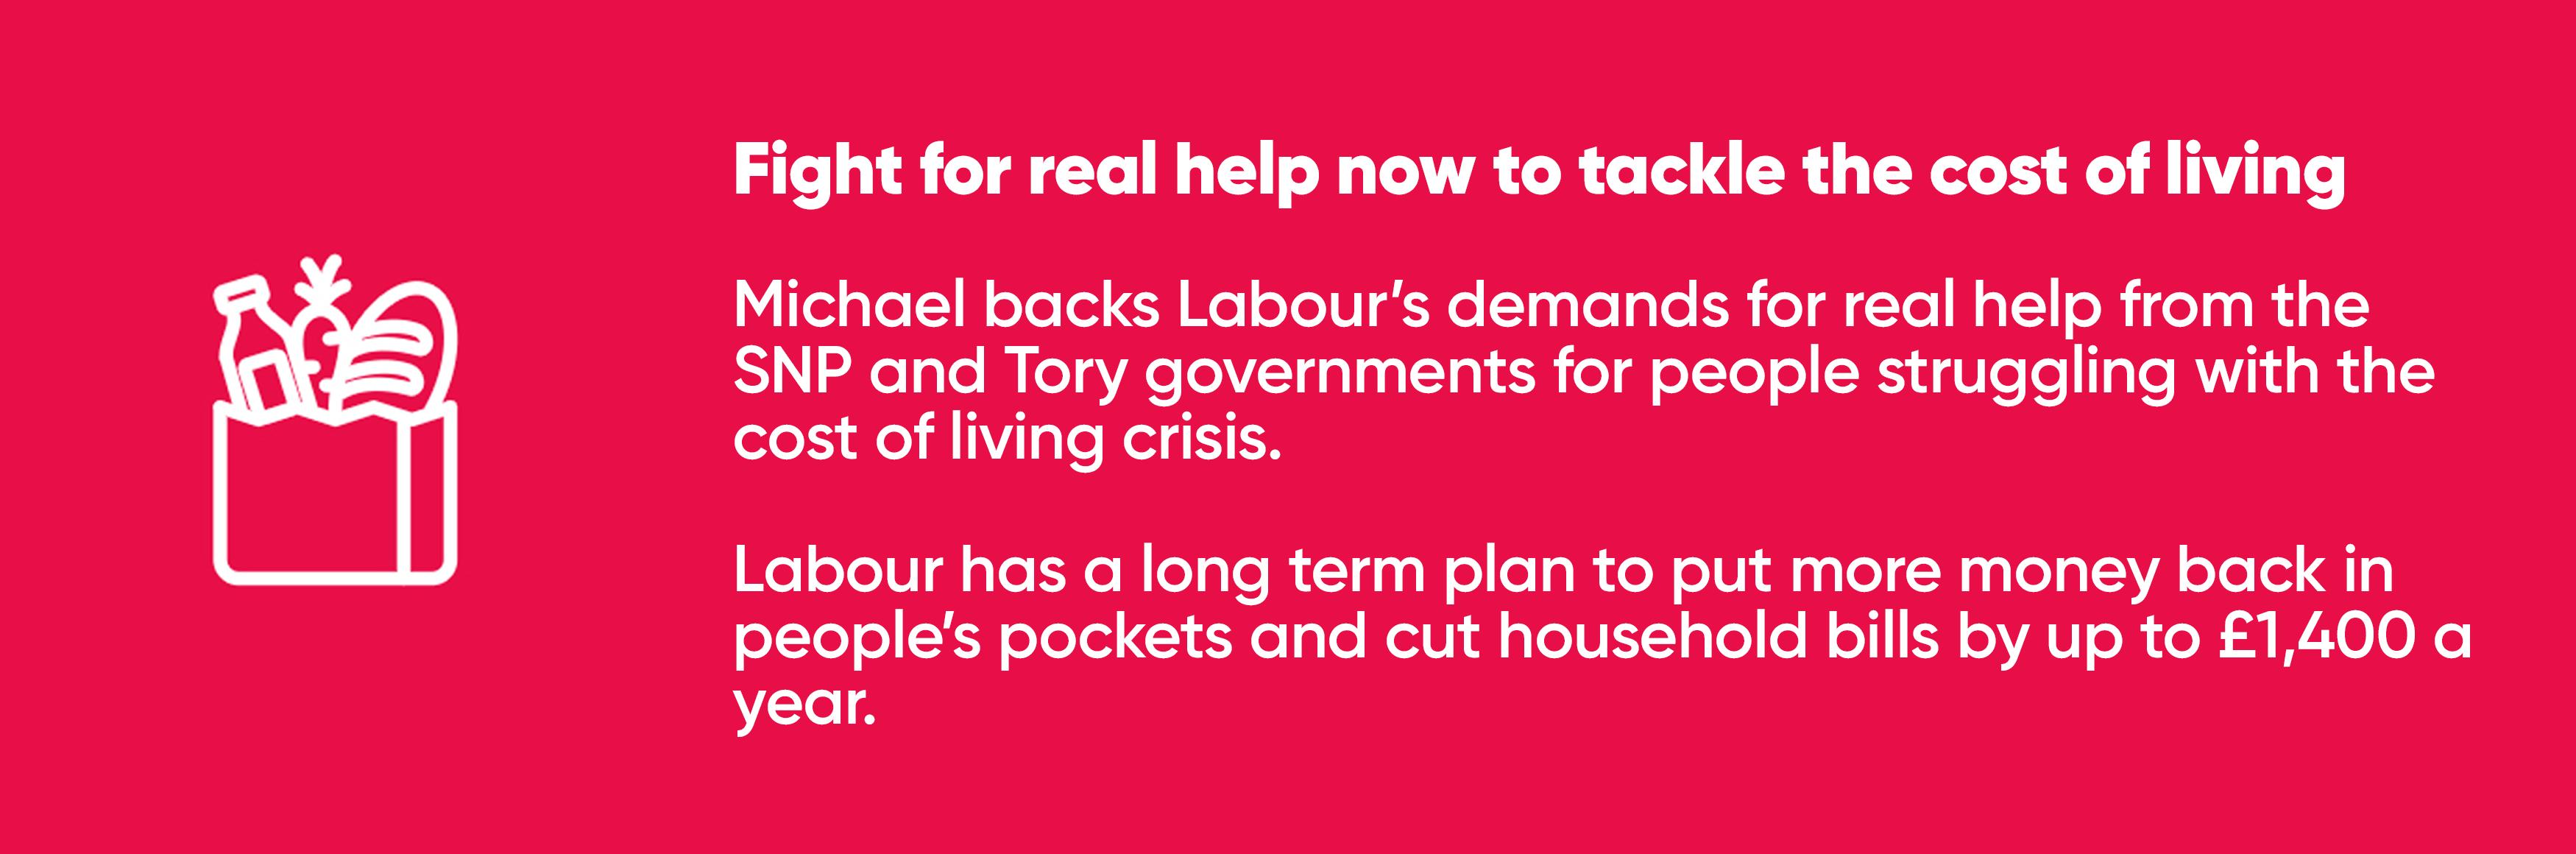 Fight for real help now to tackle the cost of living 